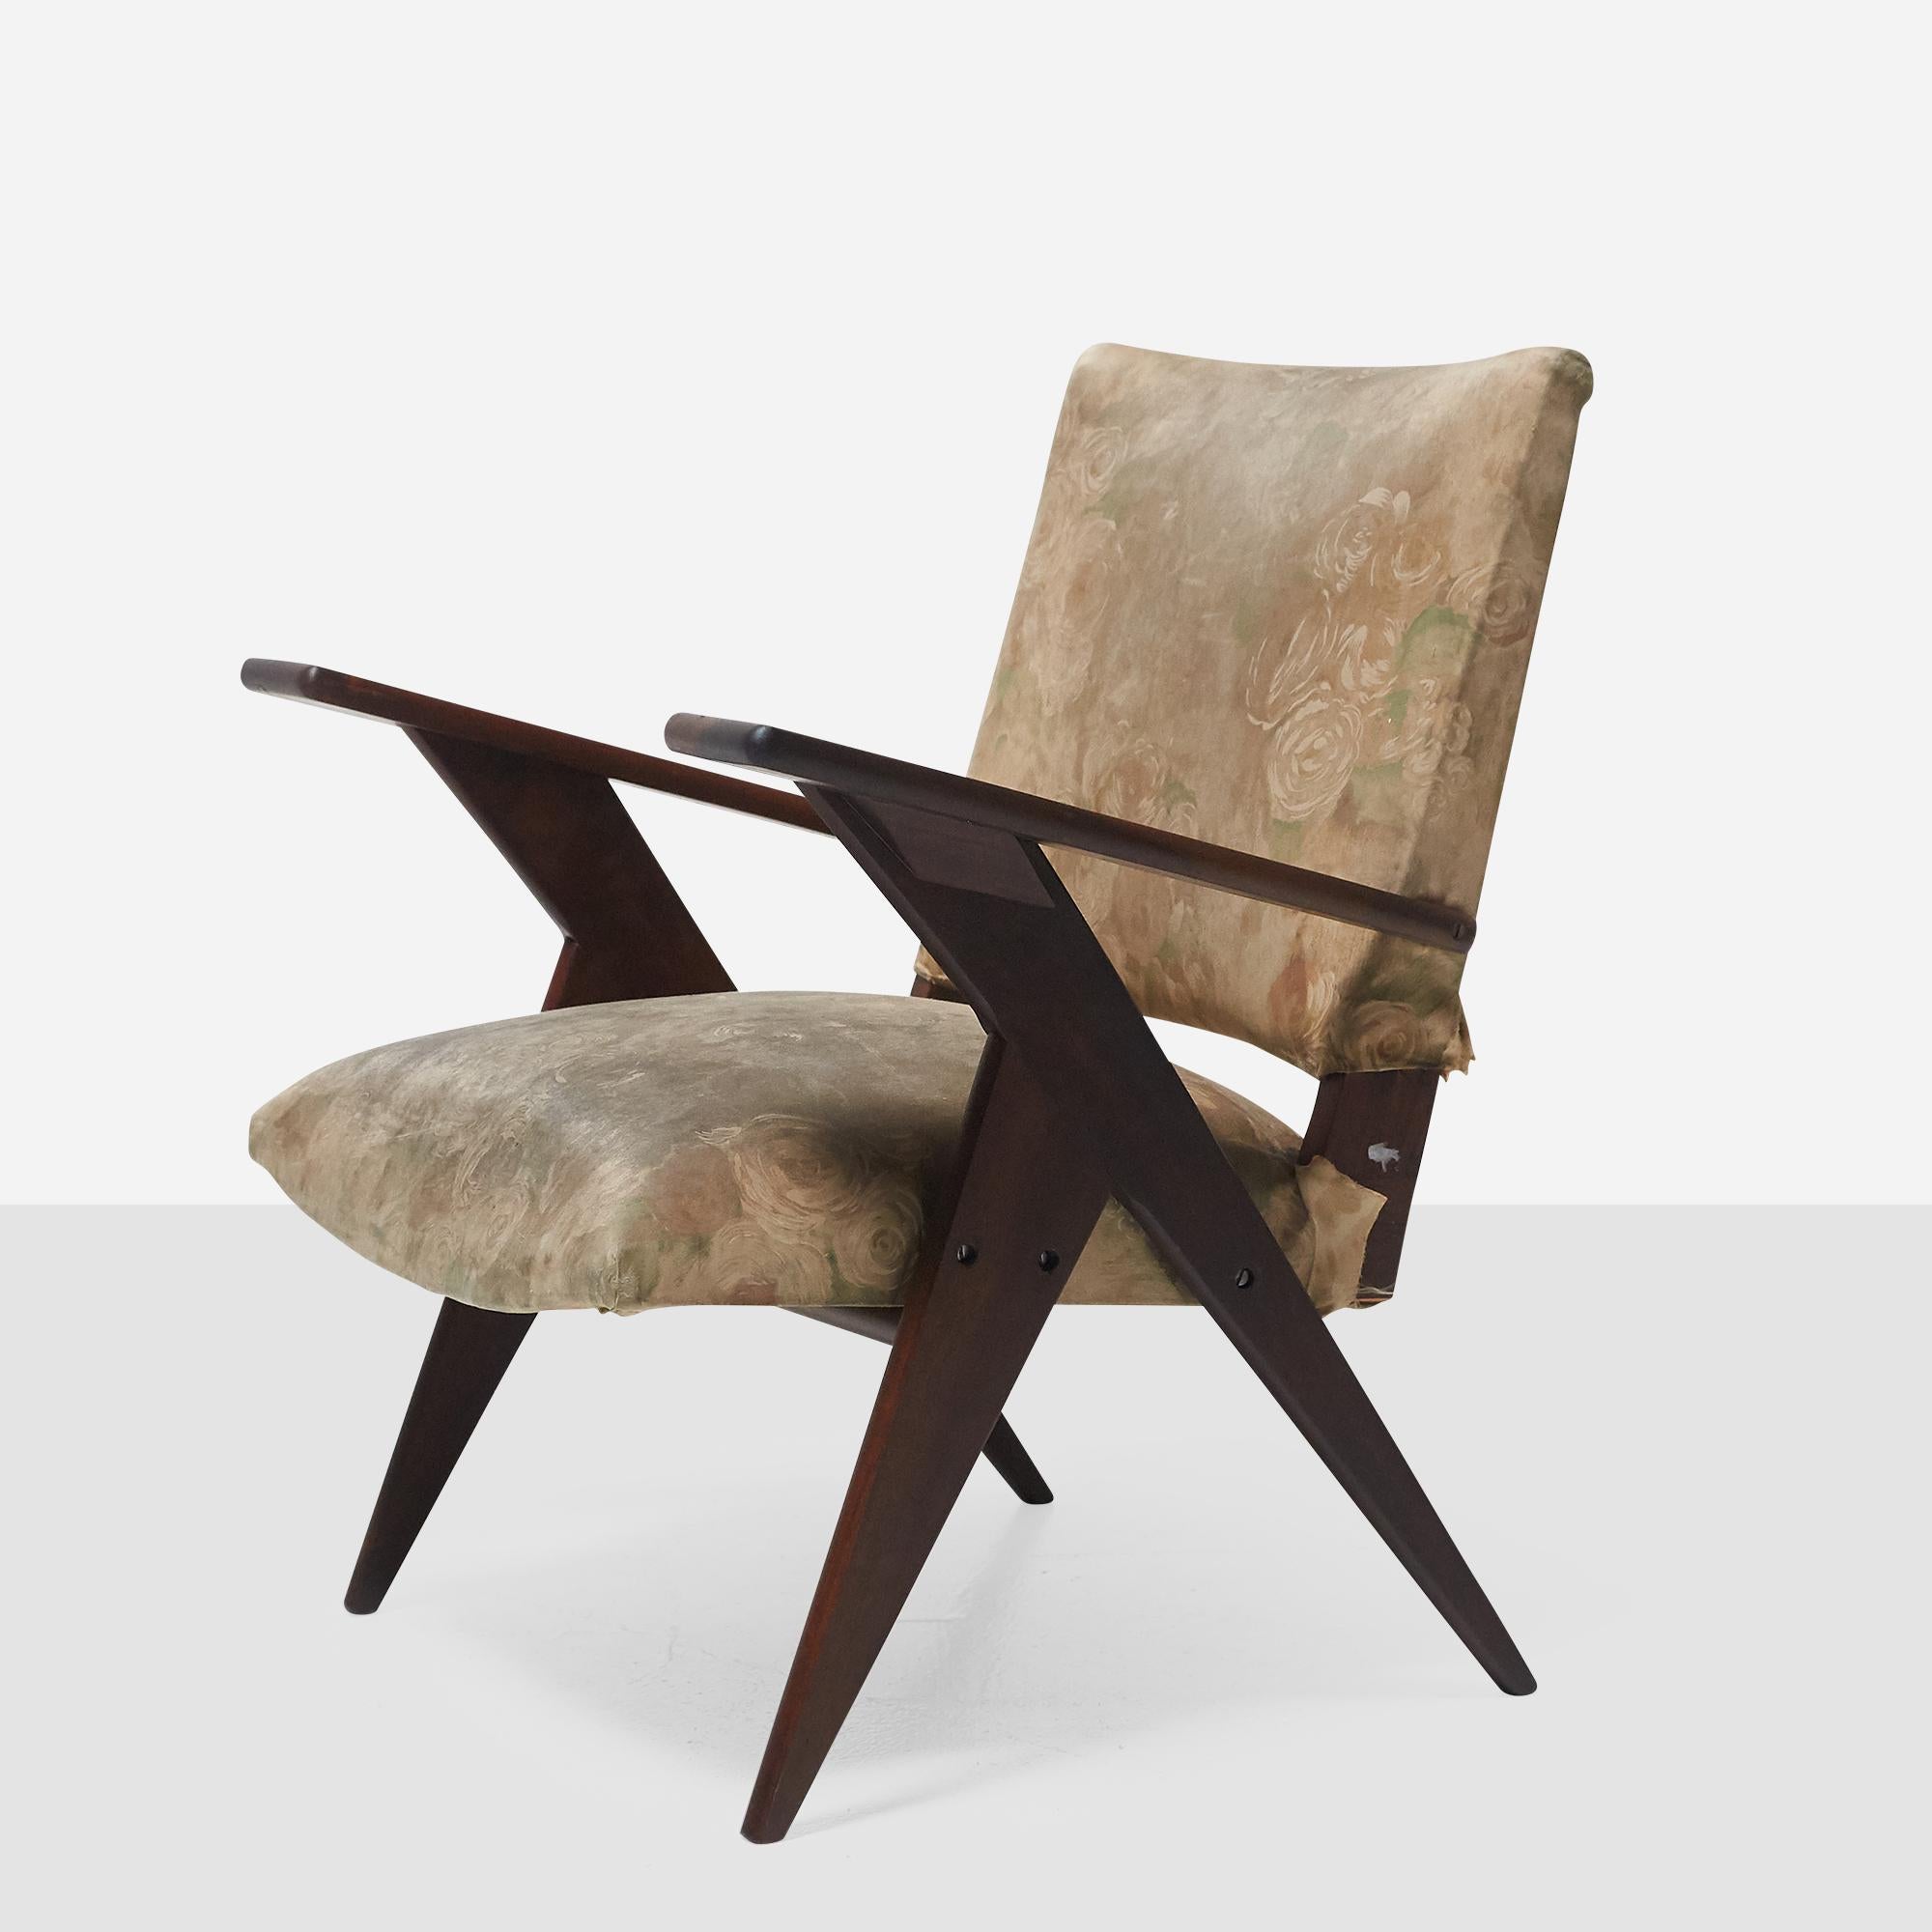 A Brazilian hardwood armchair by José Zanine Caldas with paddle arms and his signature angular lines.

The wood has been refinished and is in excellent condition. The upholstery is in original condition. This piece can be re-upholstered by our team